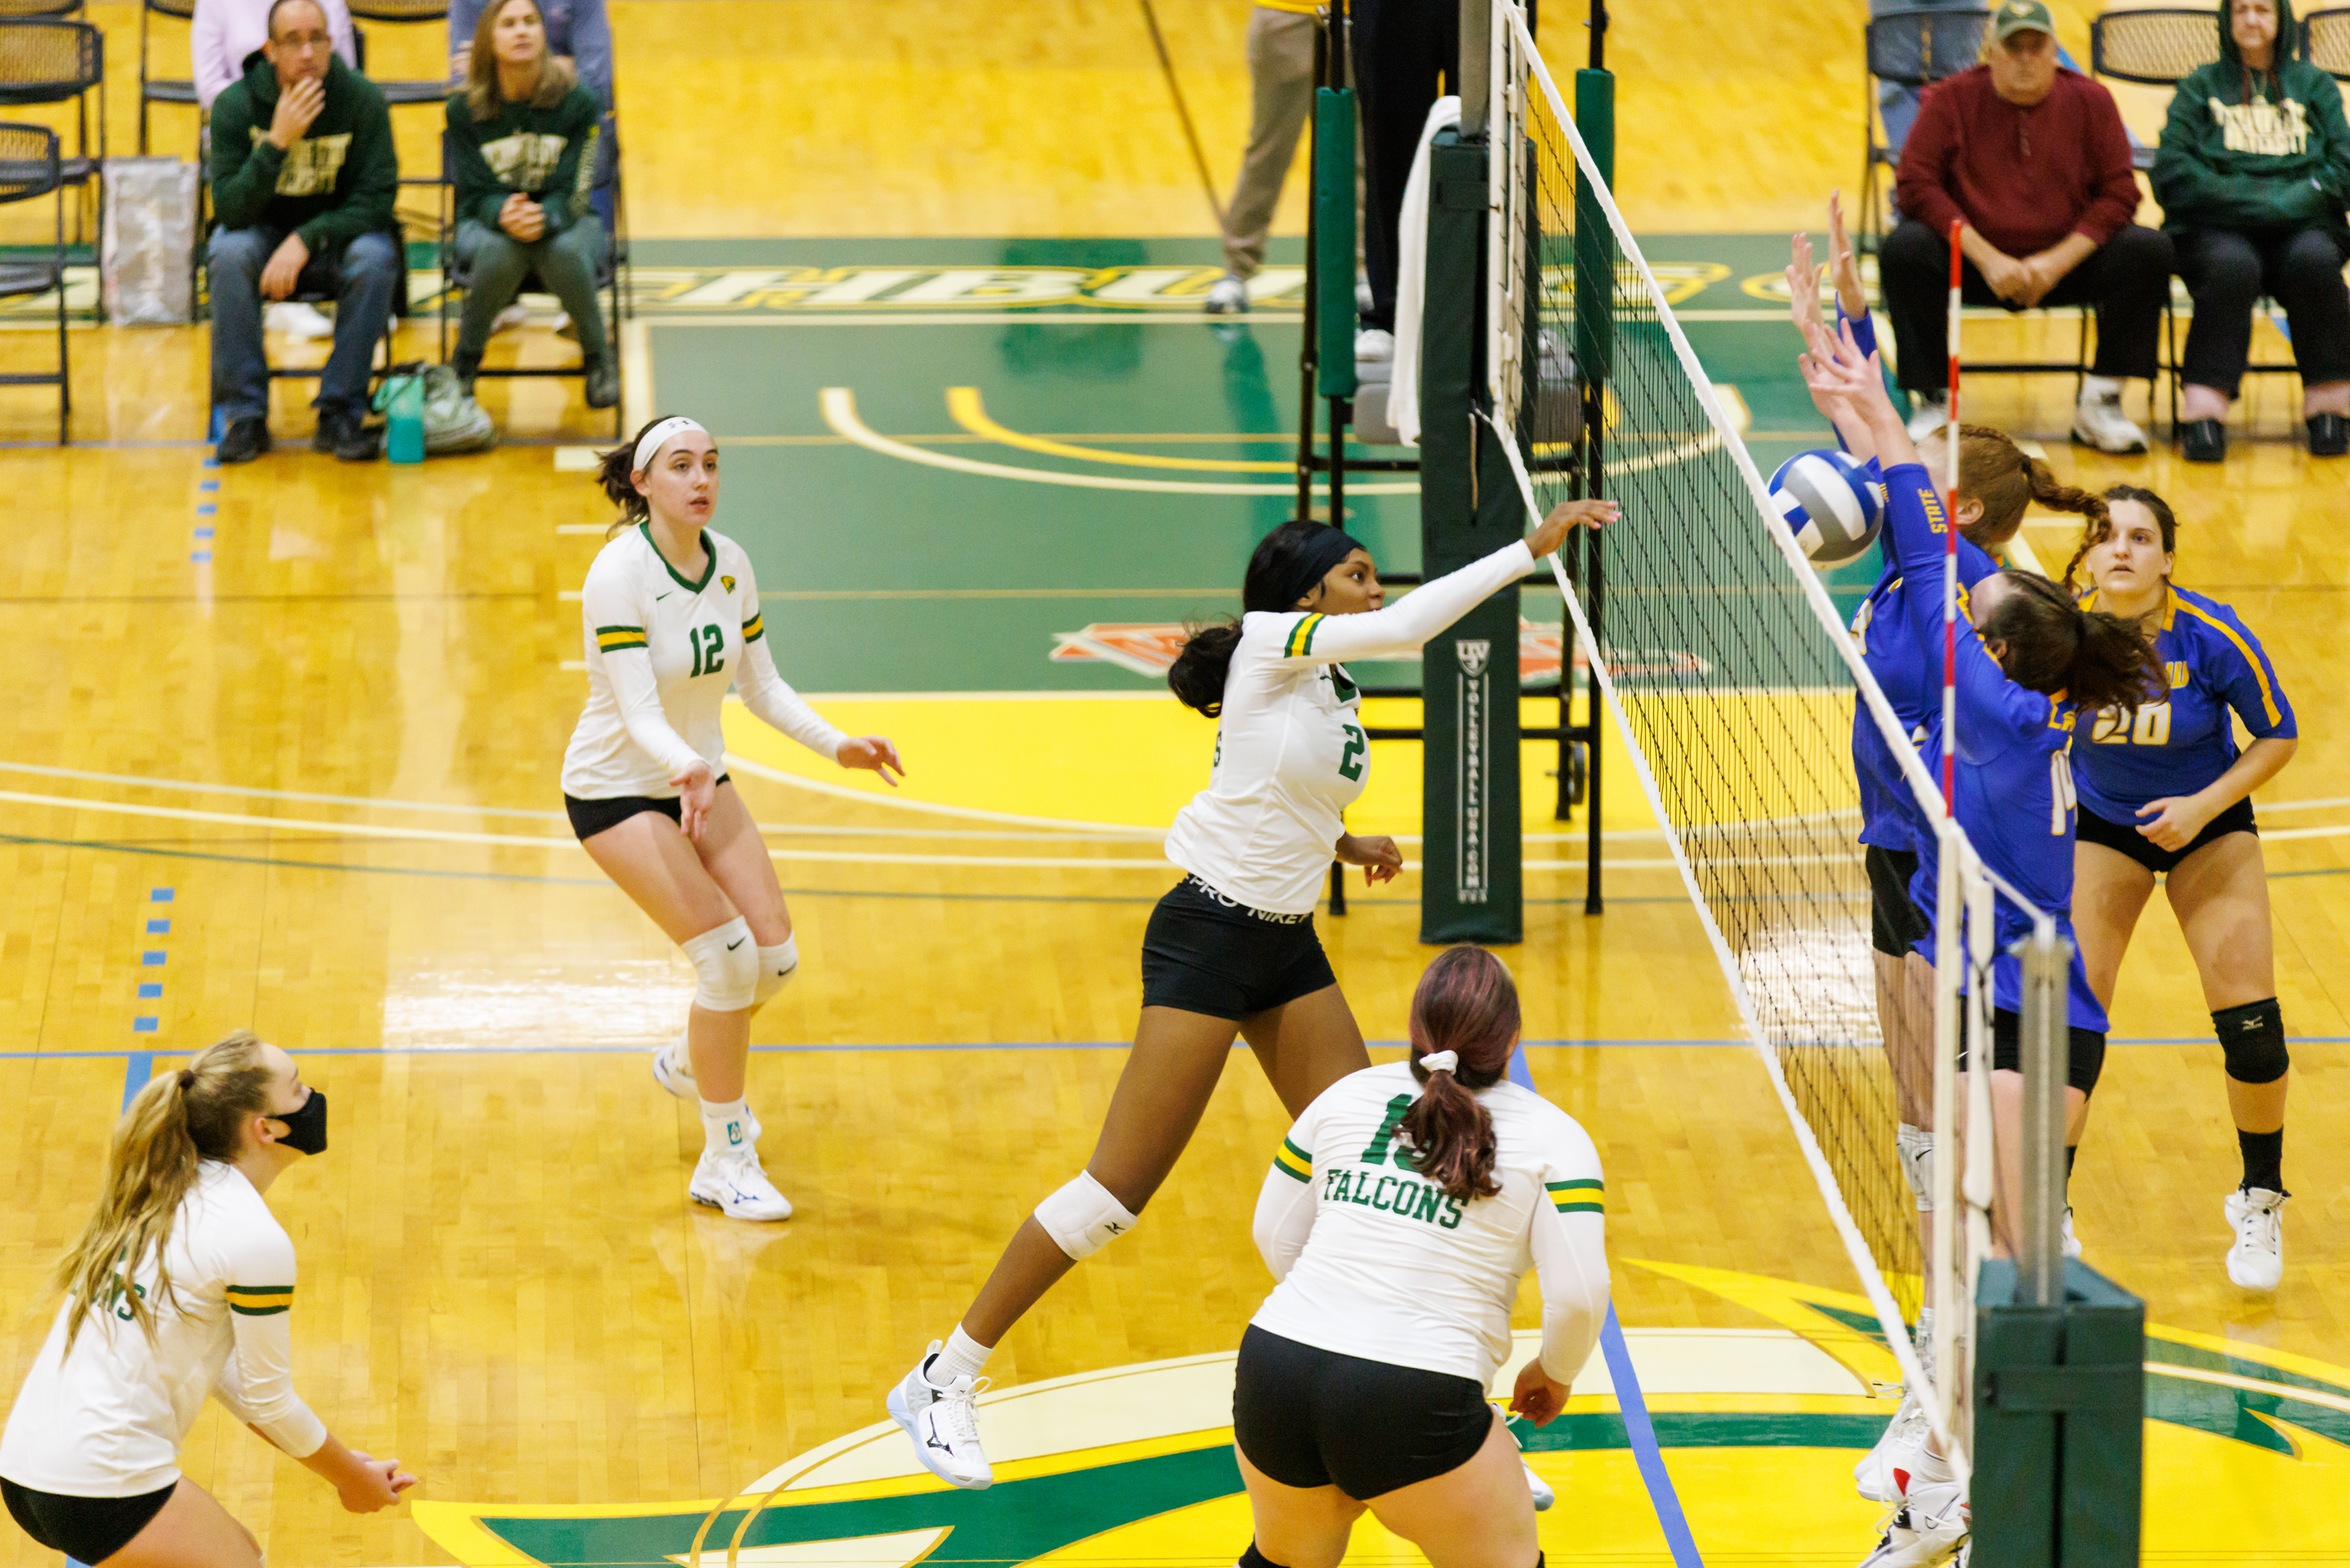 Falcons Drop Straight Set Decision To Trailblazers In Conference Action